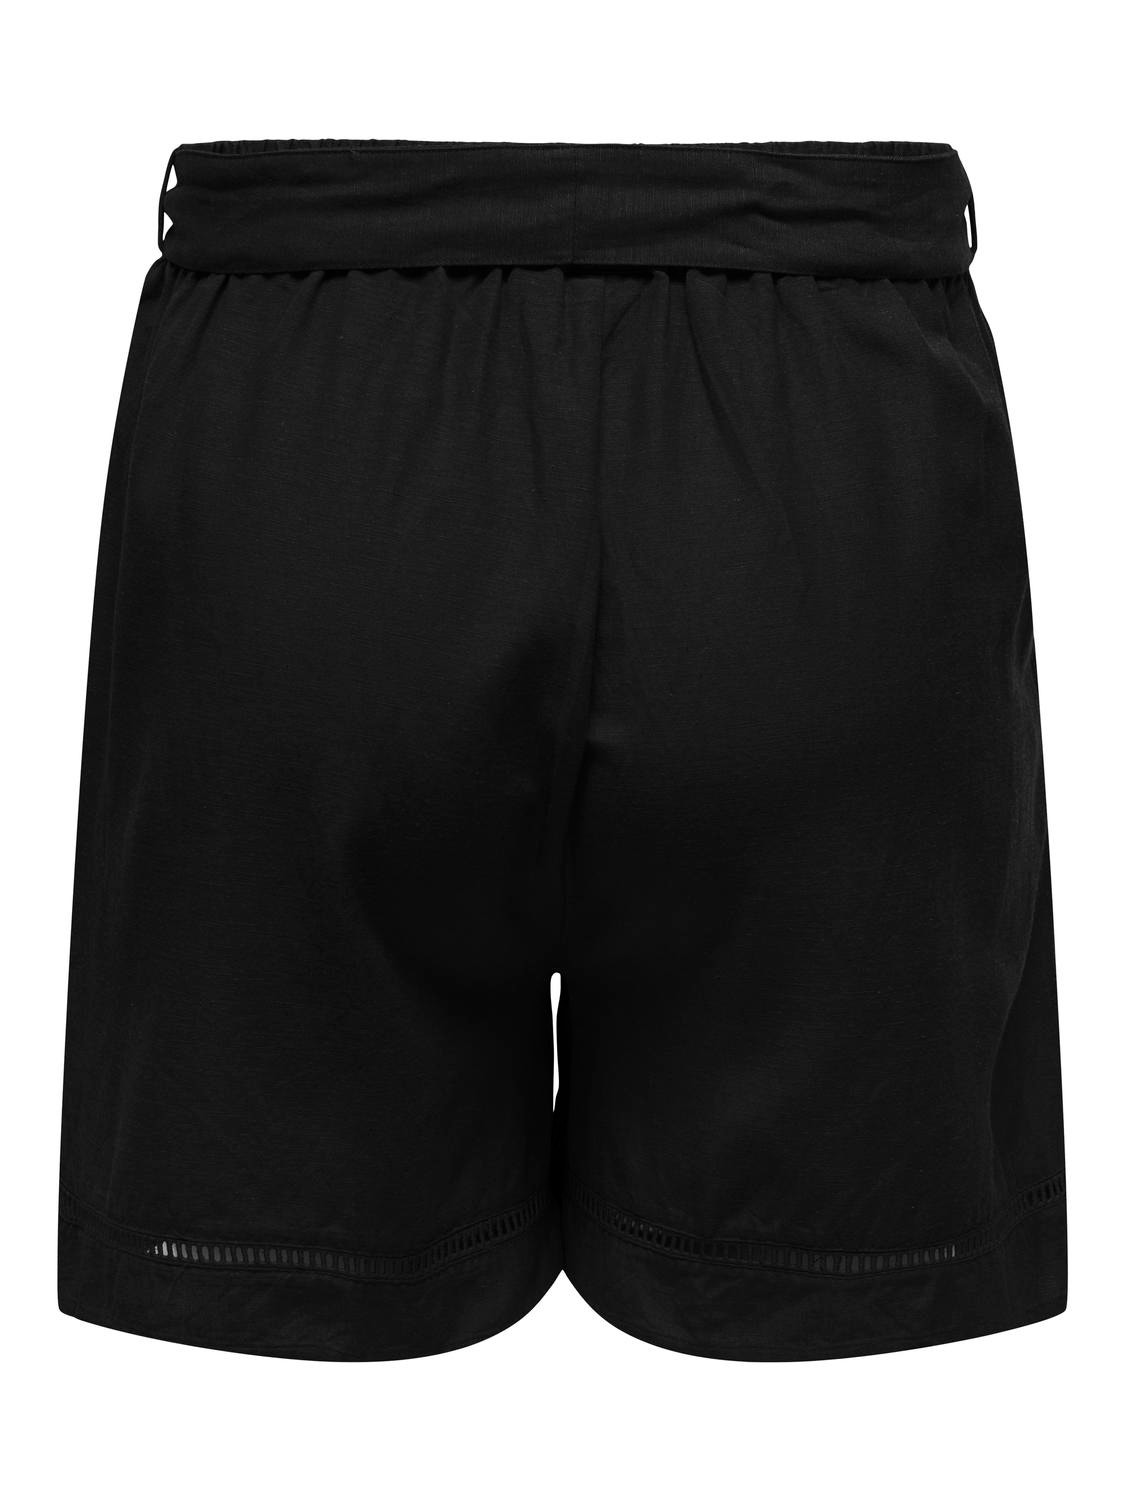 ONLY Loose fit Mid waist Shorts -Black - 15320532